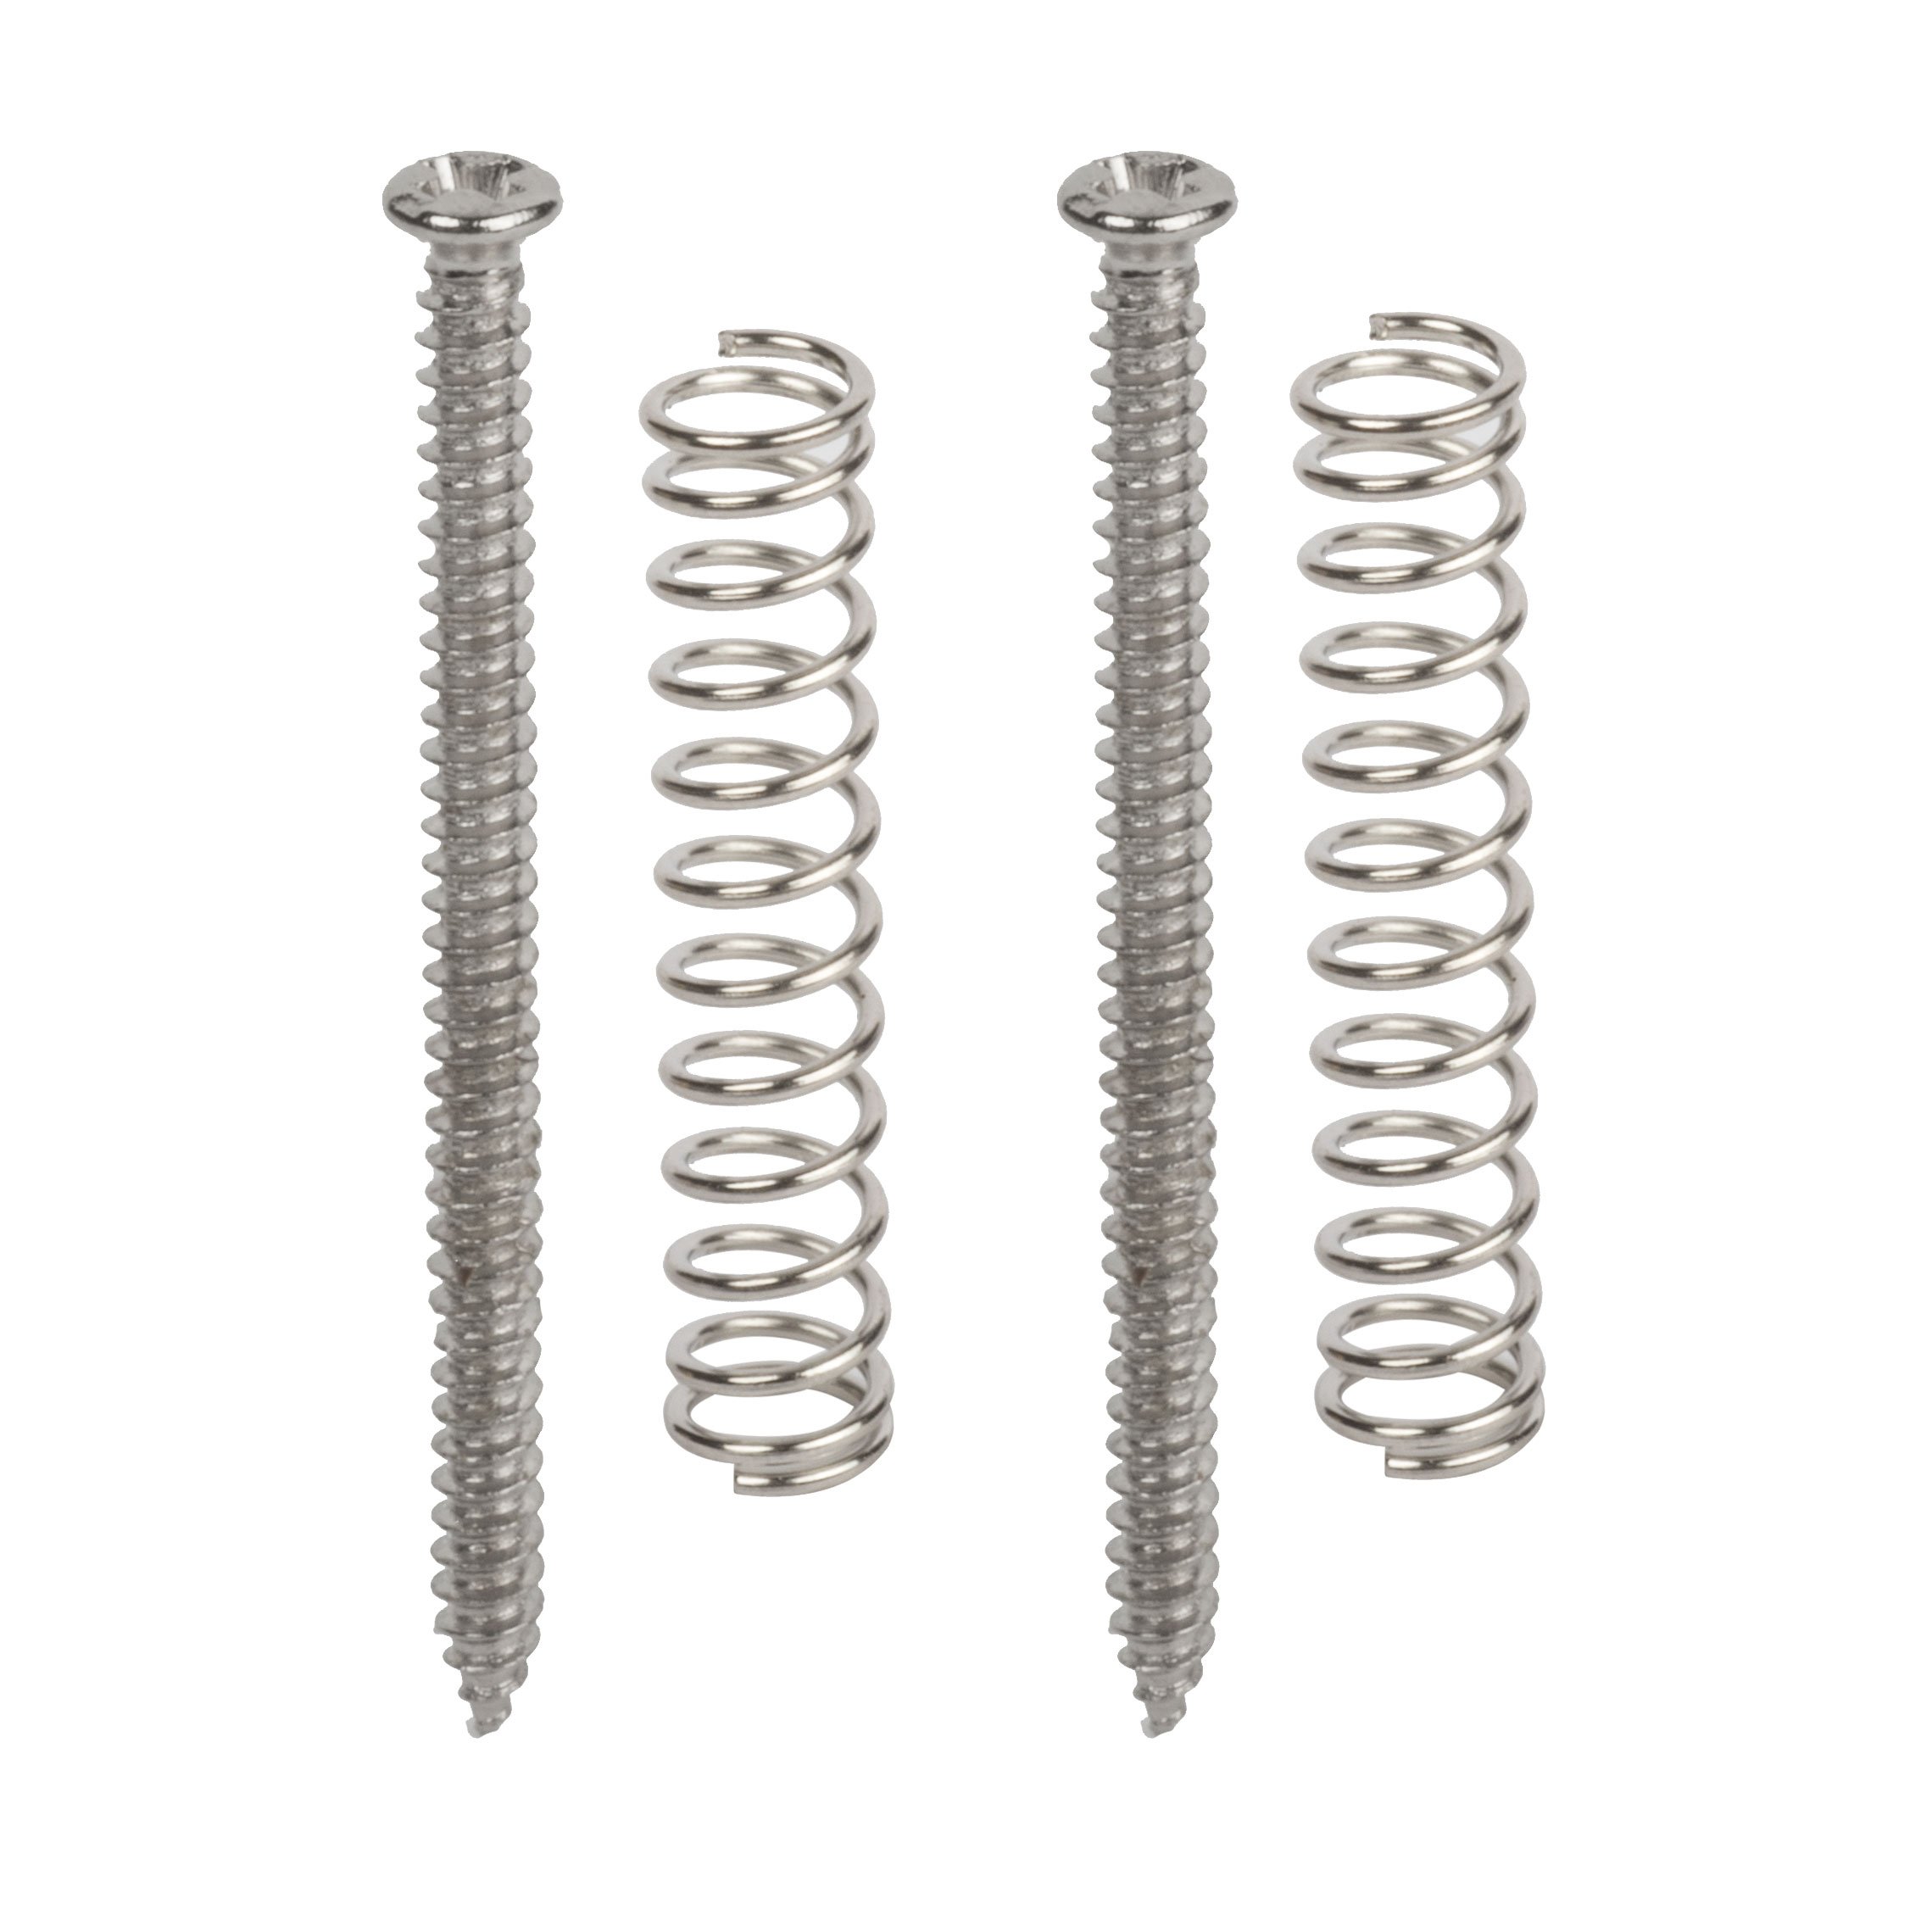 Ovalhead P-90 Mounting Screws for Solidbody